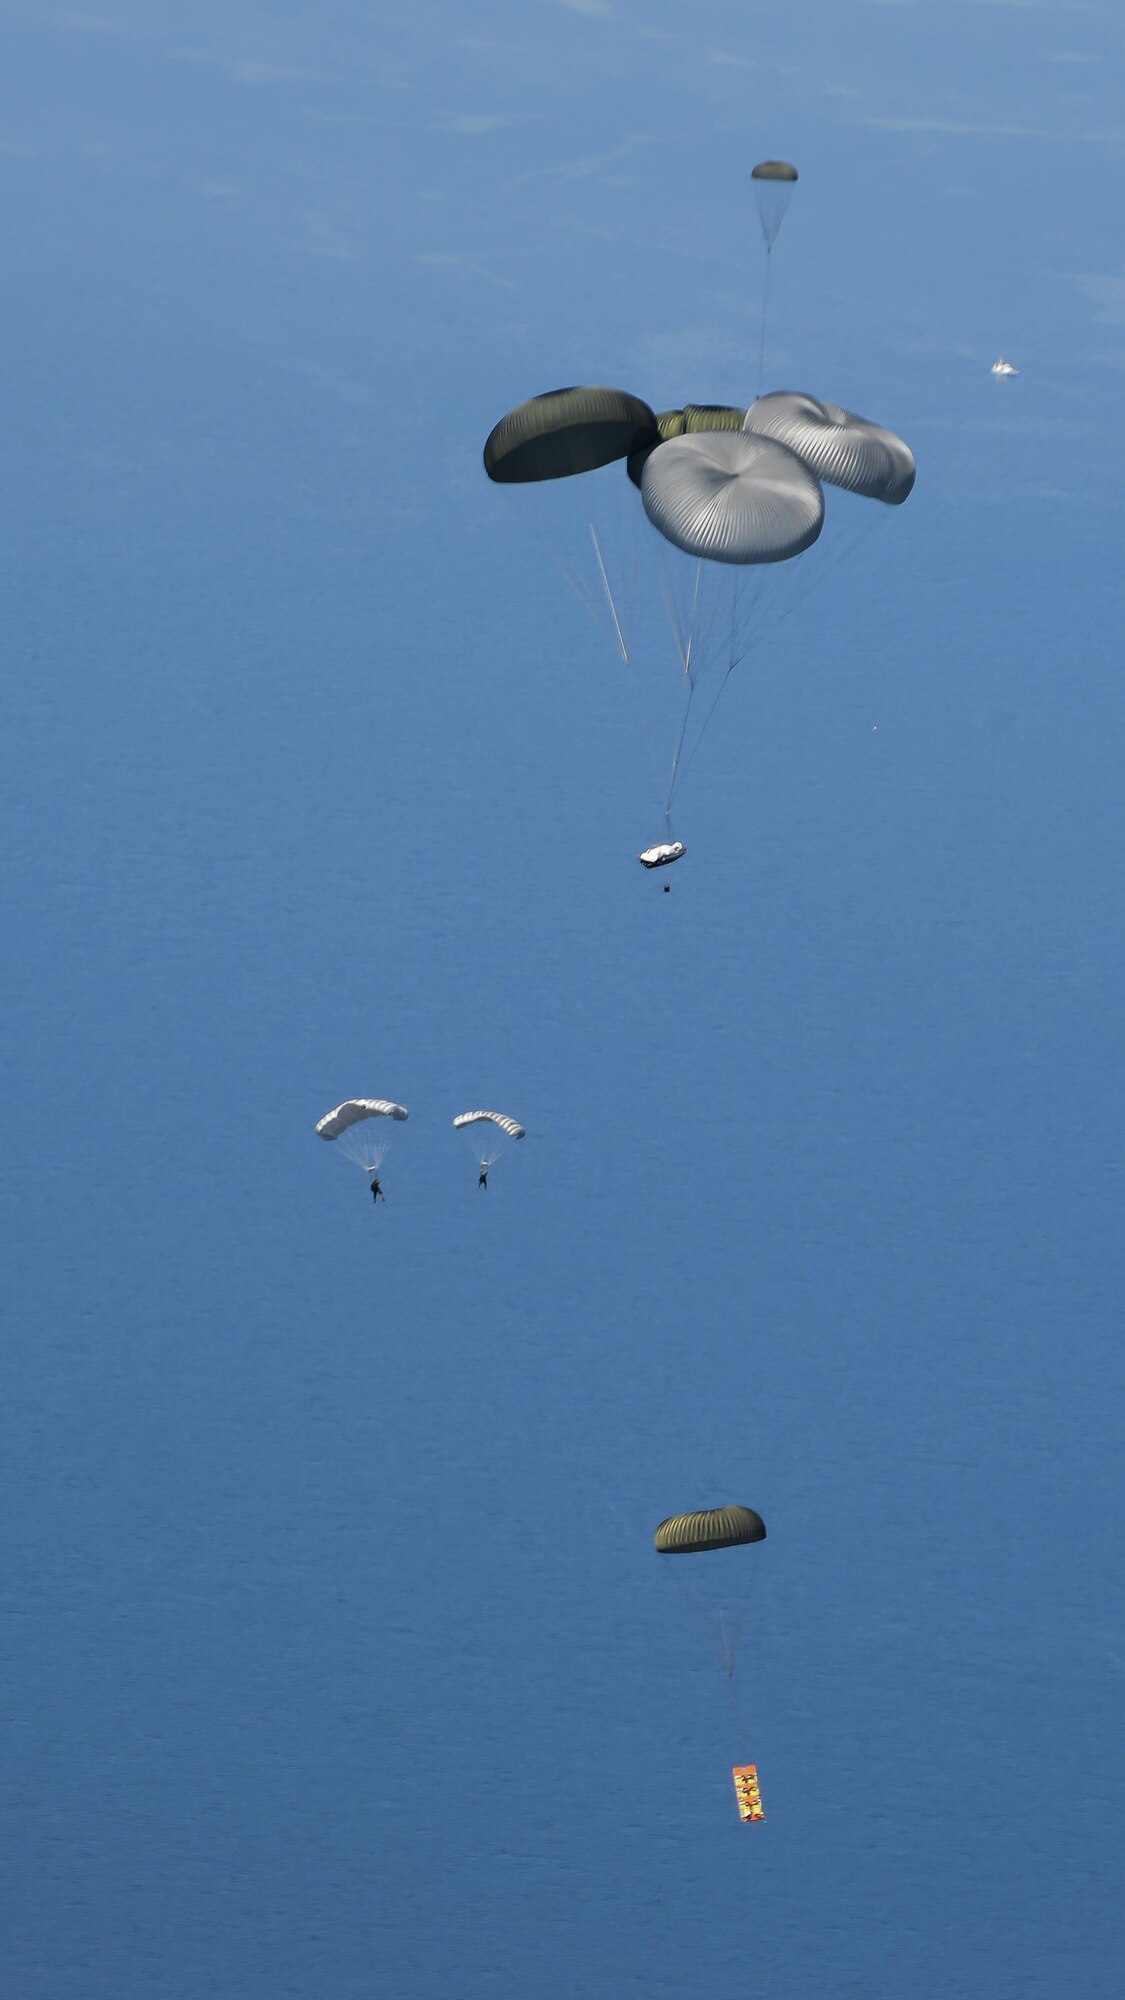 Members of the U.S. Navy Special Warfare Combatant-Craft unit perform high-altitude, low-opening parachute jumps into the Black Sea during an exercise April 16, 2016, off the coast of Bulgaria. Airmen from RAF Mildenhall, England, worked with the Naval unit to deploy a large Rigid Inflatable boat off the coast of Bulgaria while merging the capabilities of the U.S. Air Force and the U.S. Navy. (U.S. Air Force photo by Senior Airman Victoria H. Taylor/Released)